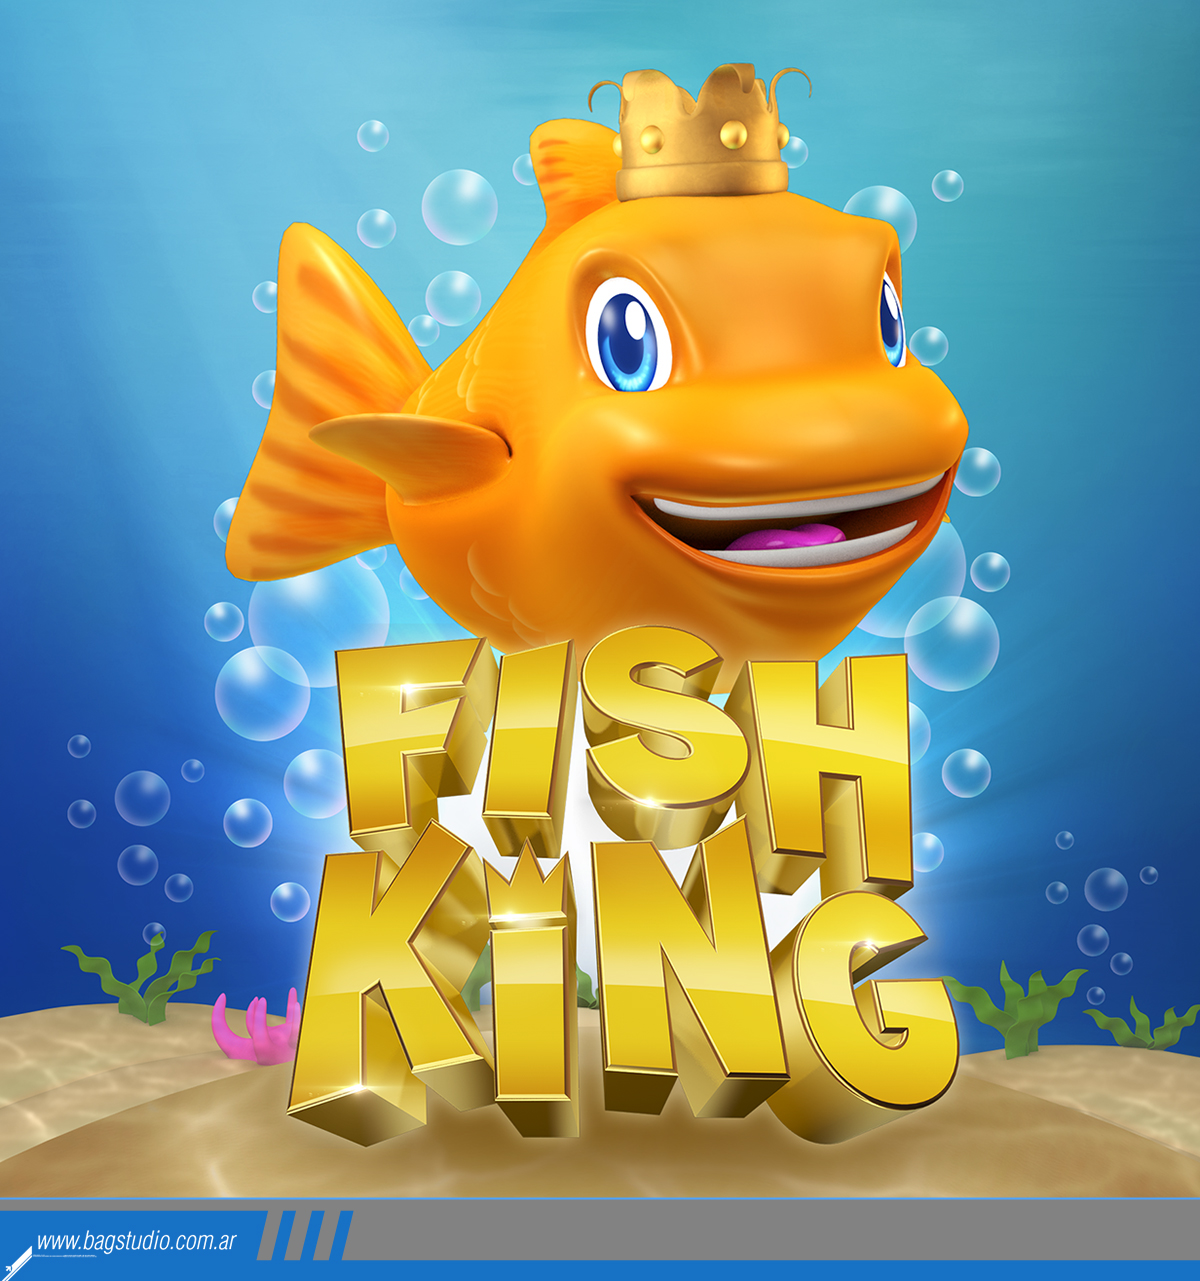 Fish King Character Design on Behance